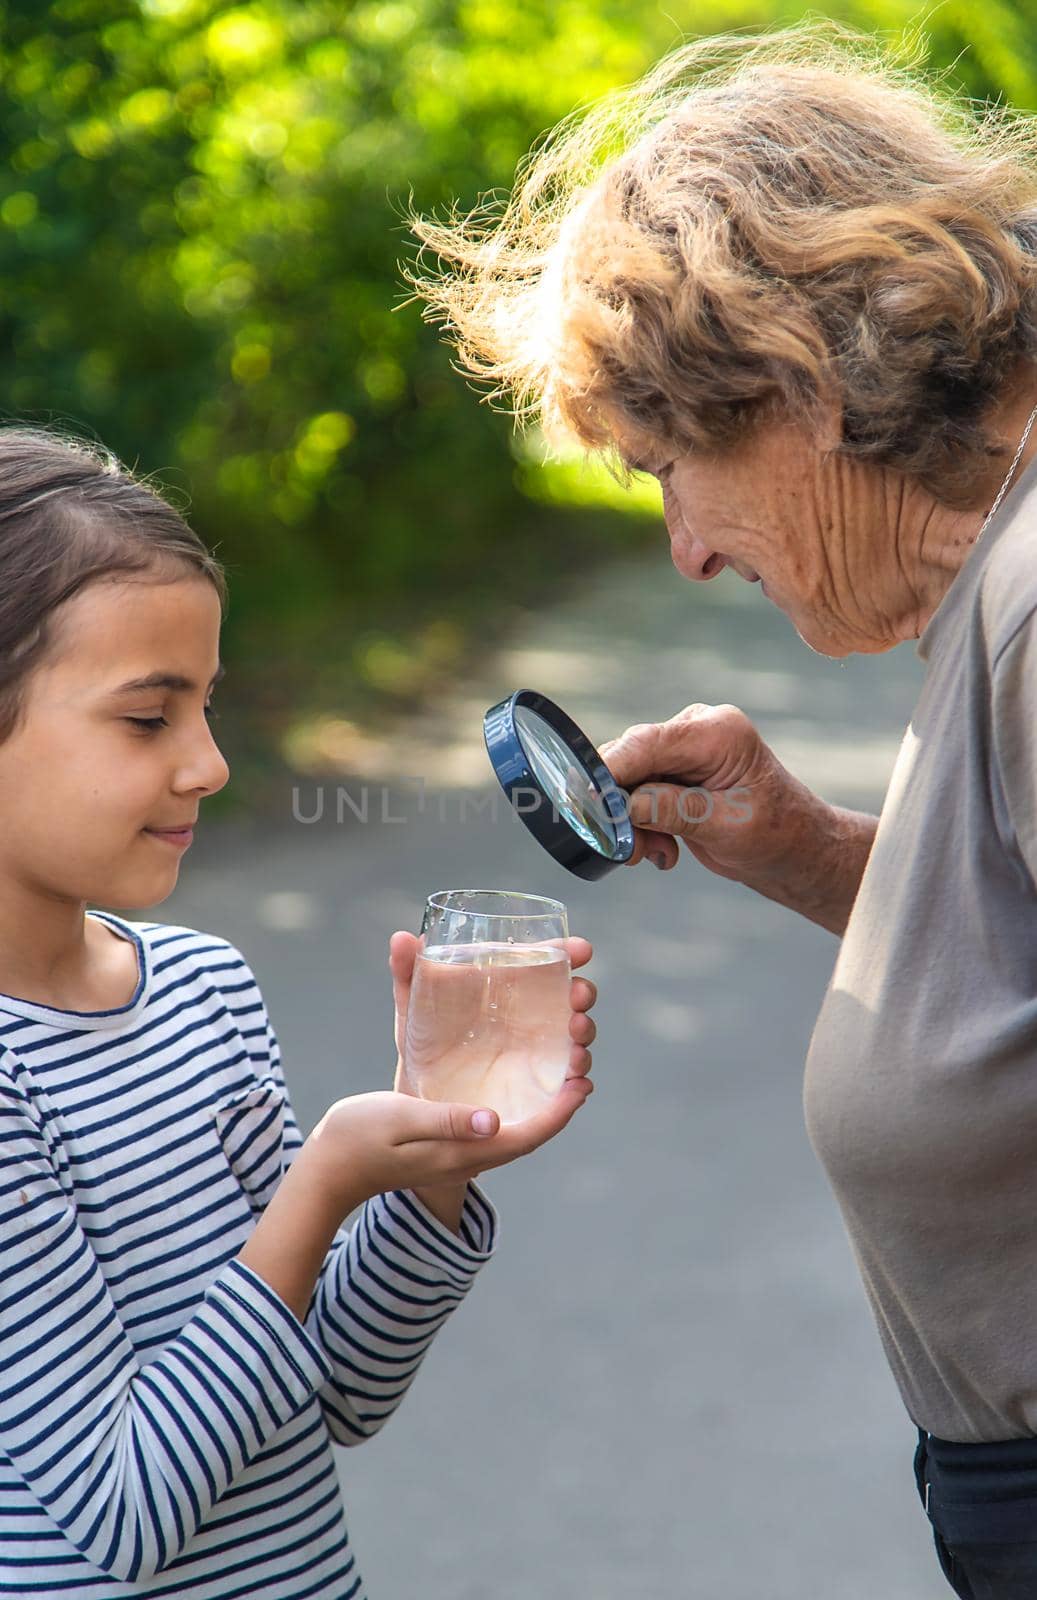 A child and grandmother examines the water with a magnifying glass. Selective focus. by yanadjana